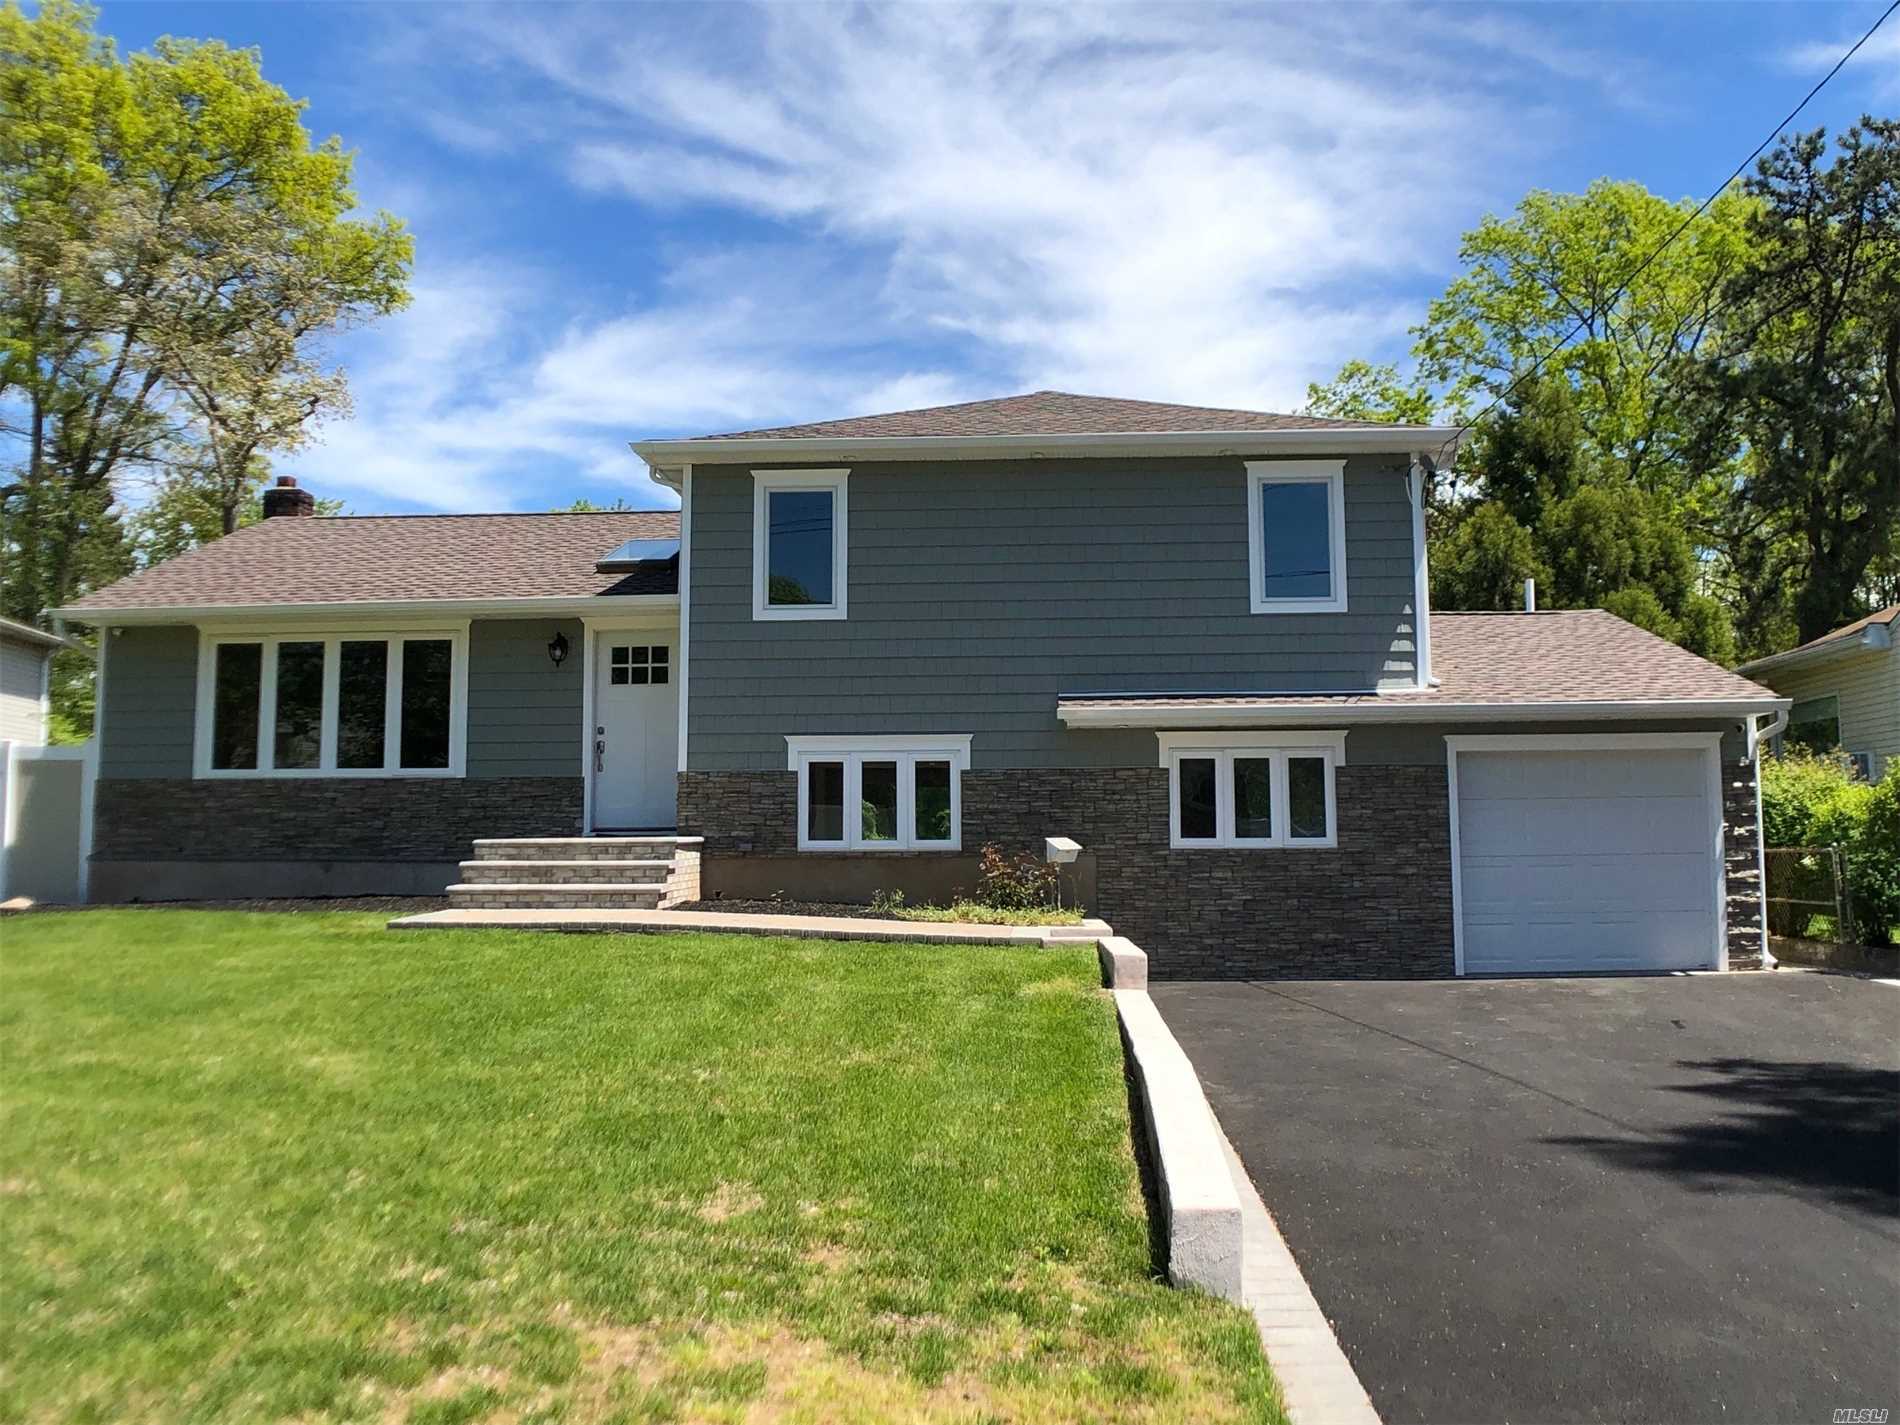 Total Renovation! All New In Viceroy Estates - Property Lovers Paradise!! All Energy Efficient Appliances - All New Kitchen Overlooks Beautiful Park-like Yard - Insulated Windows & Doors - Programmable Thermostat